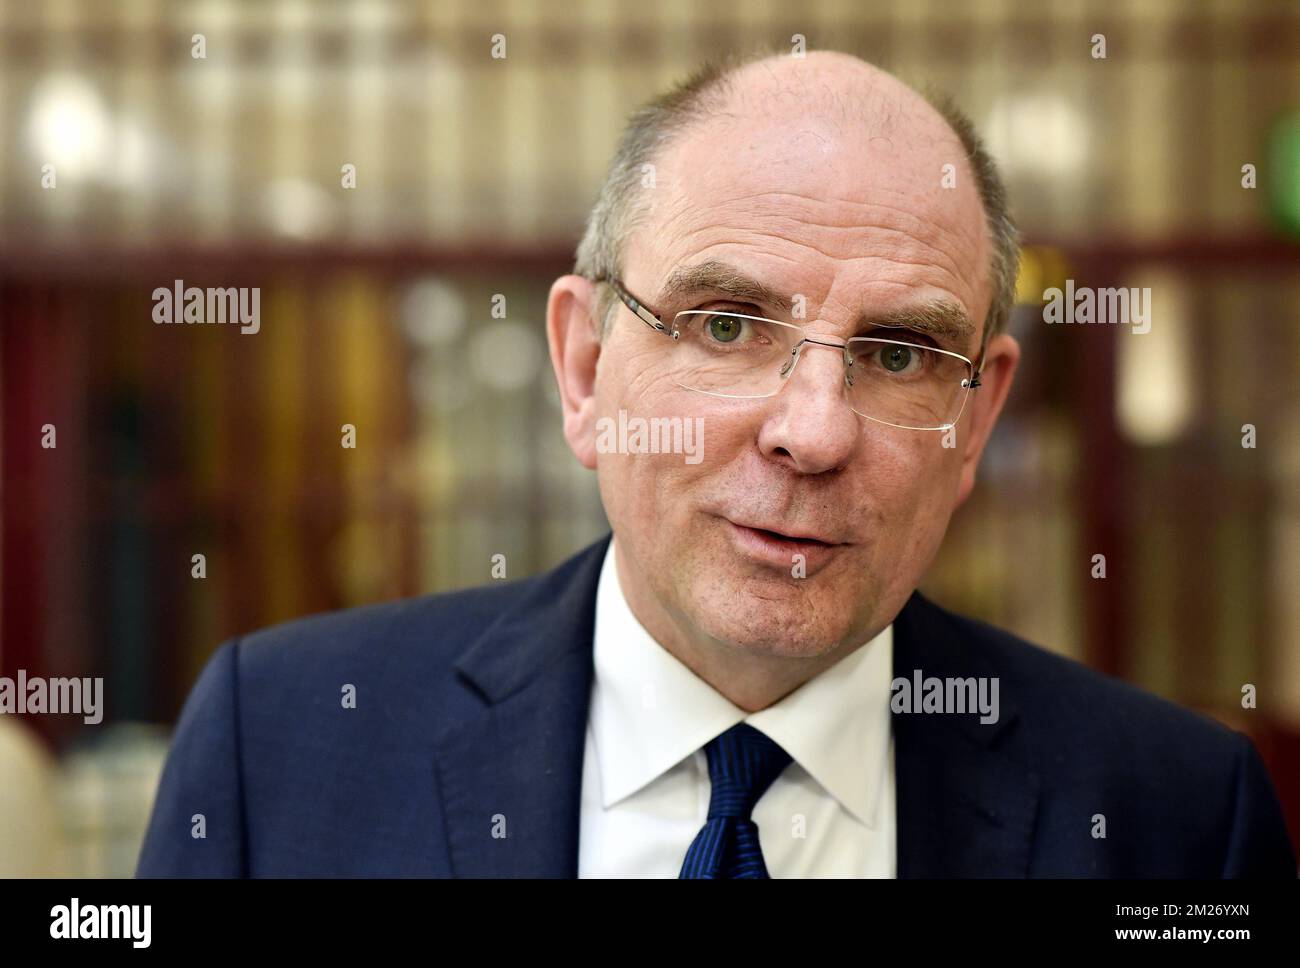 Minister of Justice Koen Geens pictured during a visit to the Antwerp prison, Monday 08 May 2017. BELGA PHOTO ERIC LALMAND  Stock Photo